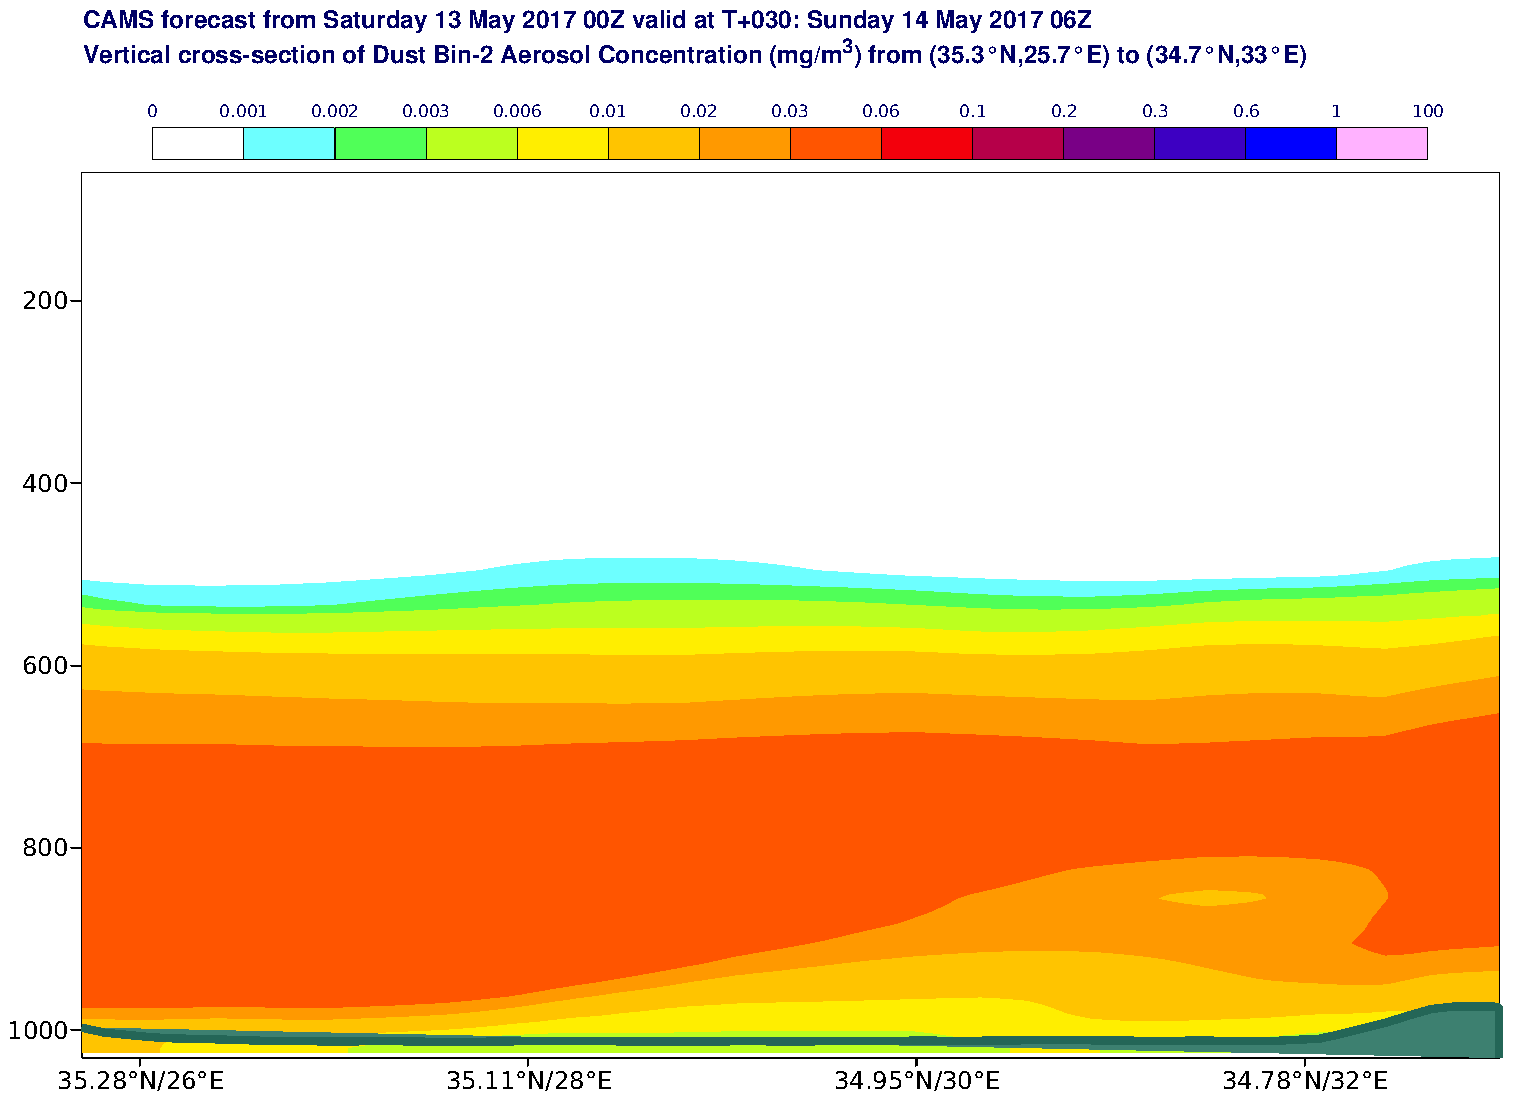 Vertical cross-section of Dust Bin-2 Aerosol Concentration (mg/m3) valid at T30 - 2017-05-14 06:00